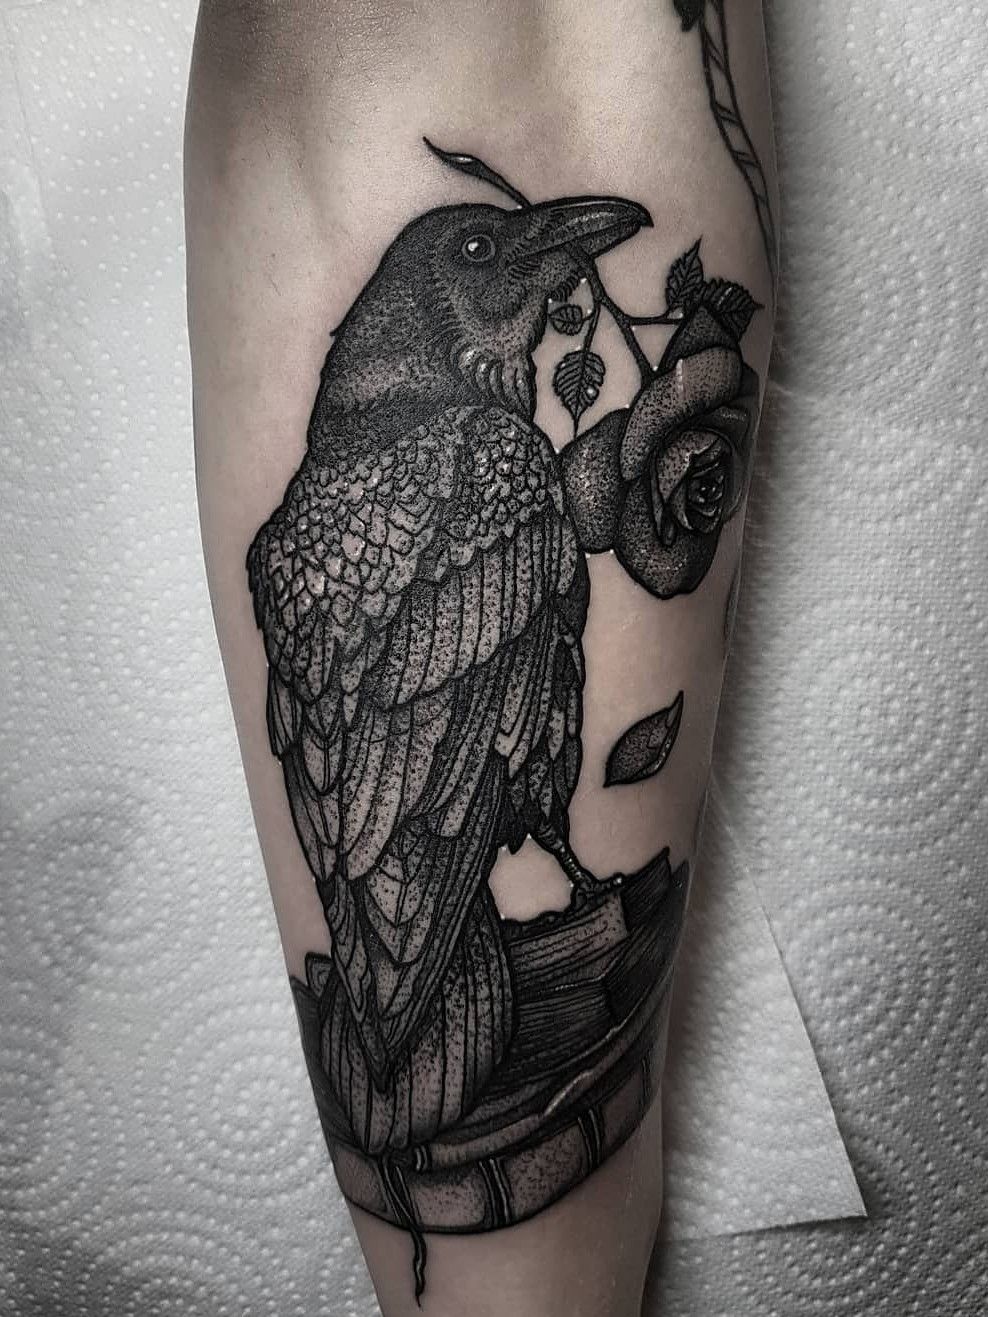 Incredible fine line raven design Style Fine Line Color Black Tags  Best Awesome Great  Geometric tattoo Raven tattoo Symbolic tattoos